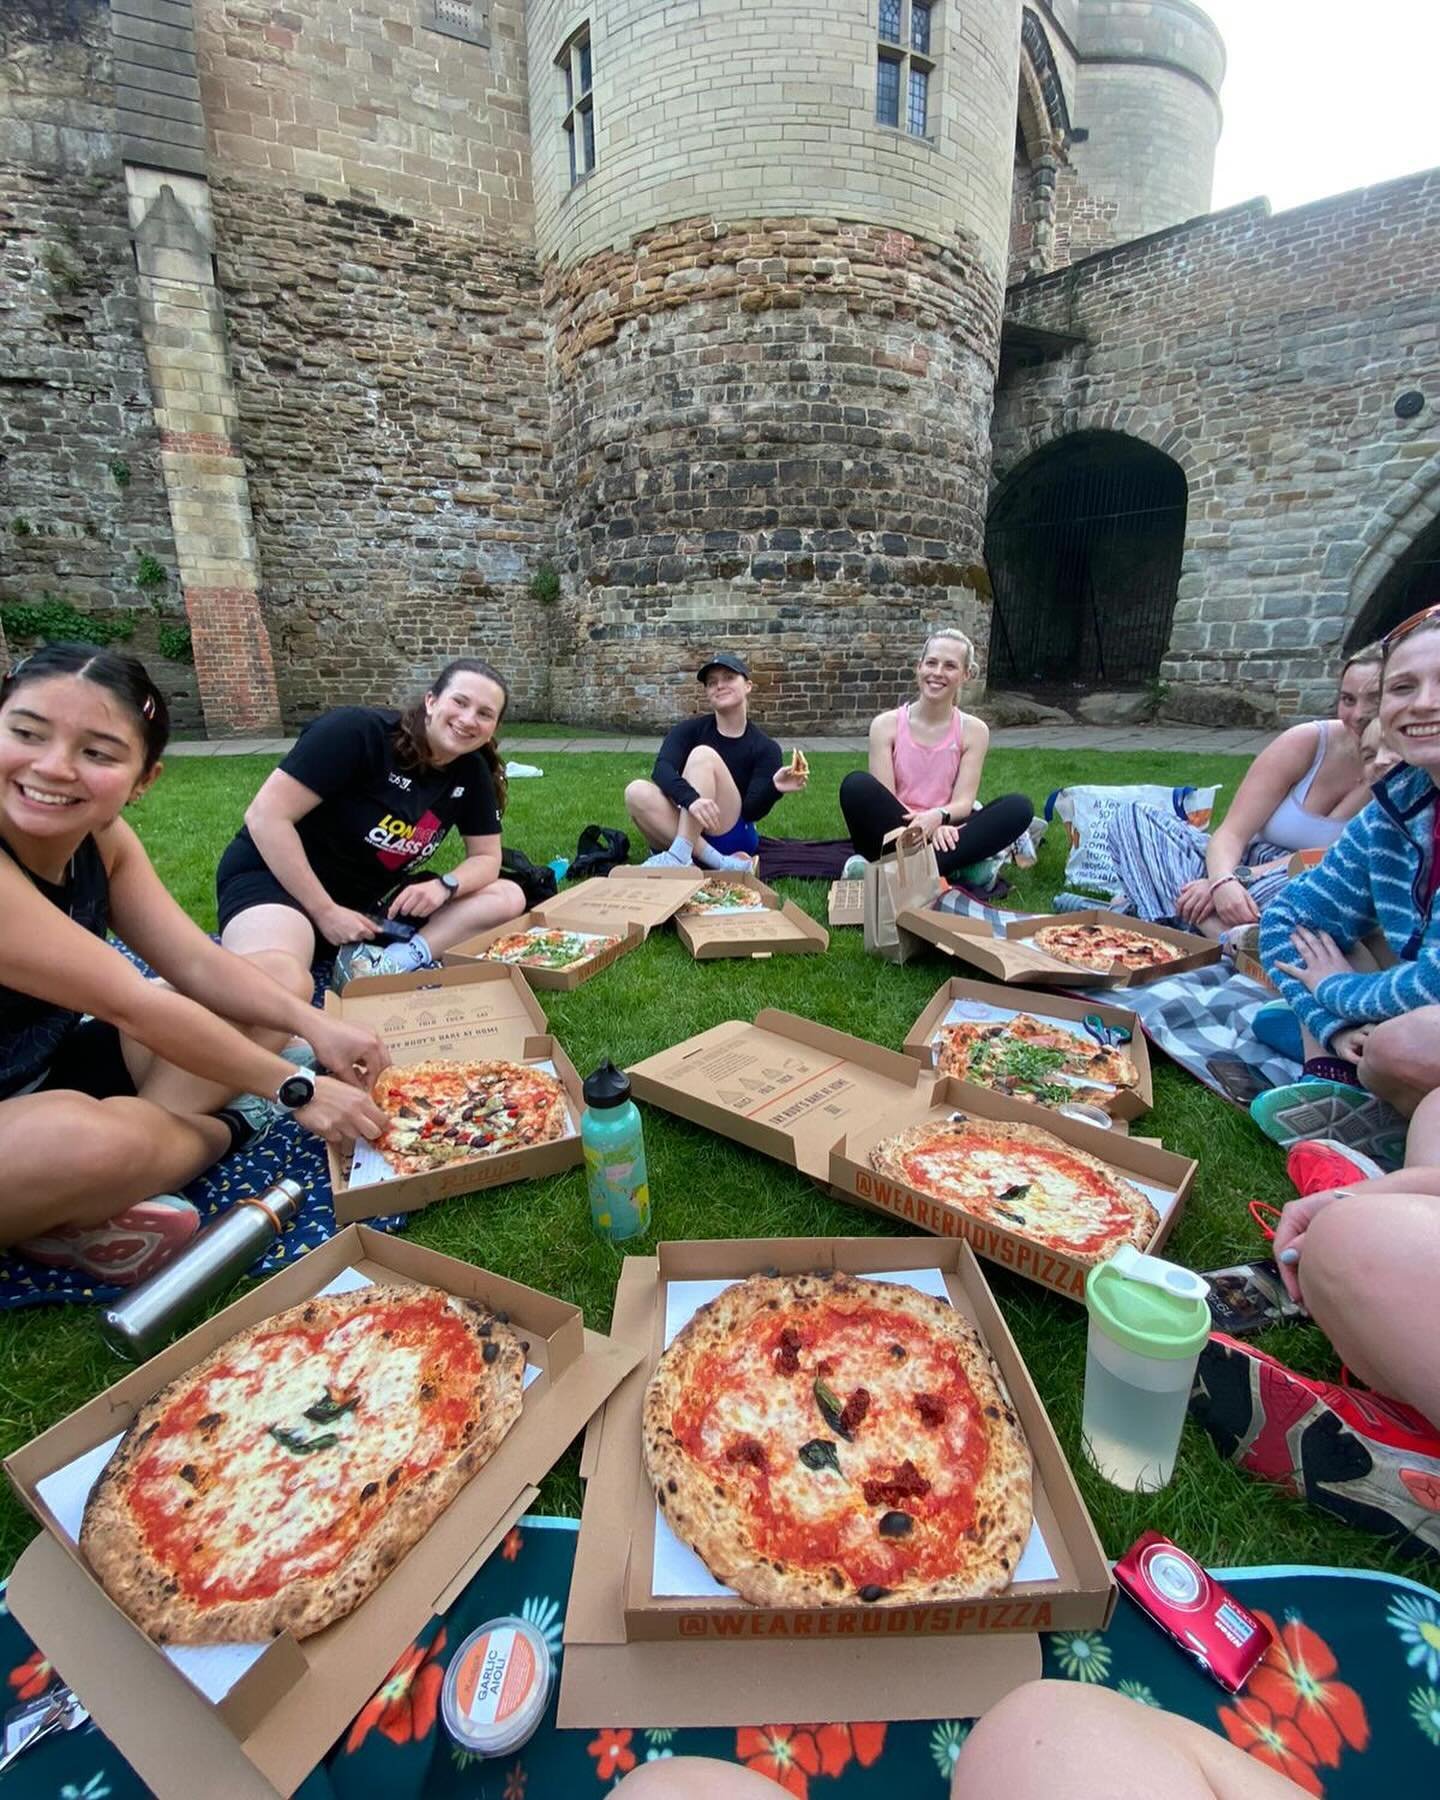 These Girls Run &amp; eat pizzaaaaa 🍕🍕🍕

ALL the wholesome vibes at TGR Notts last night, we are OBSESSED 🥹🥹

More runs finishing in the park soon please 🦆🌞

Love, 
The TGR girls xxx